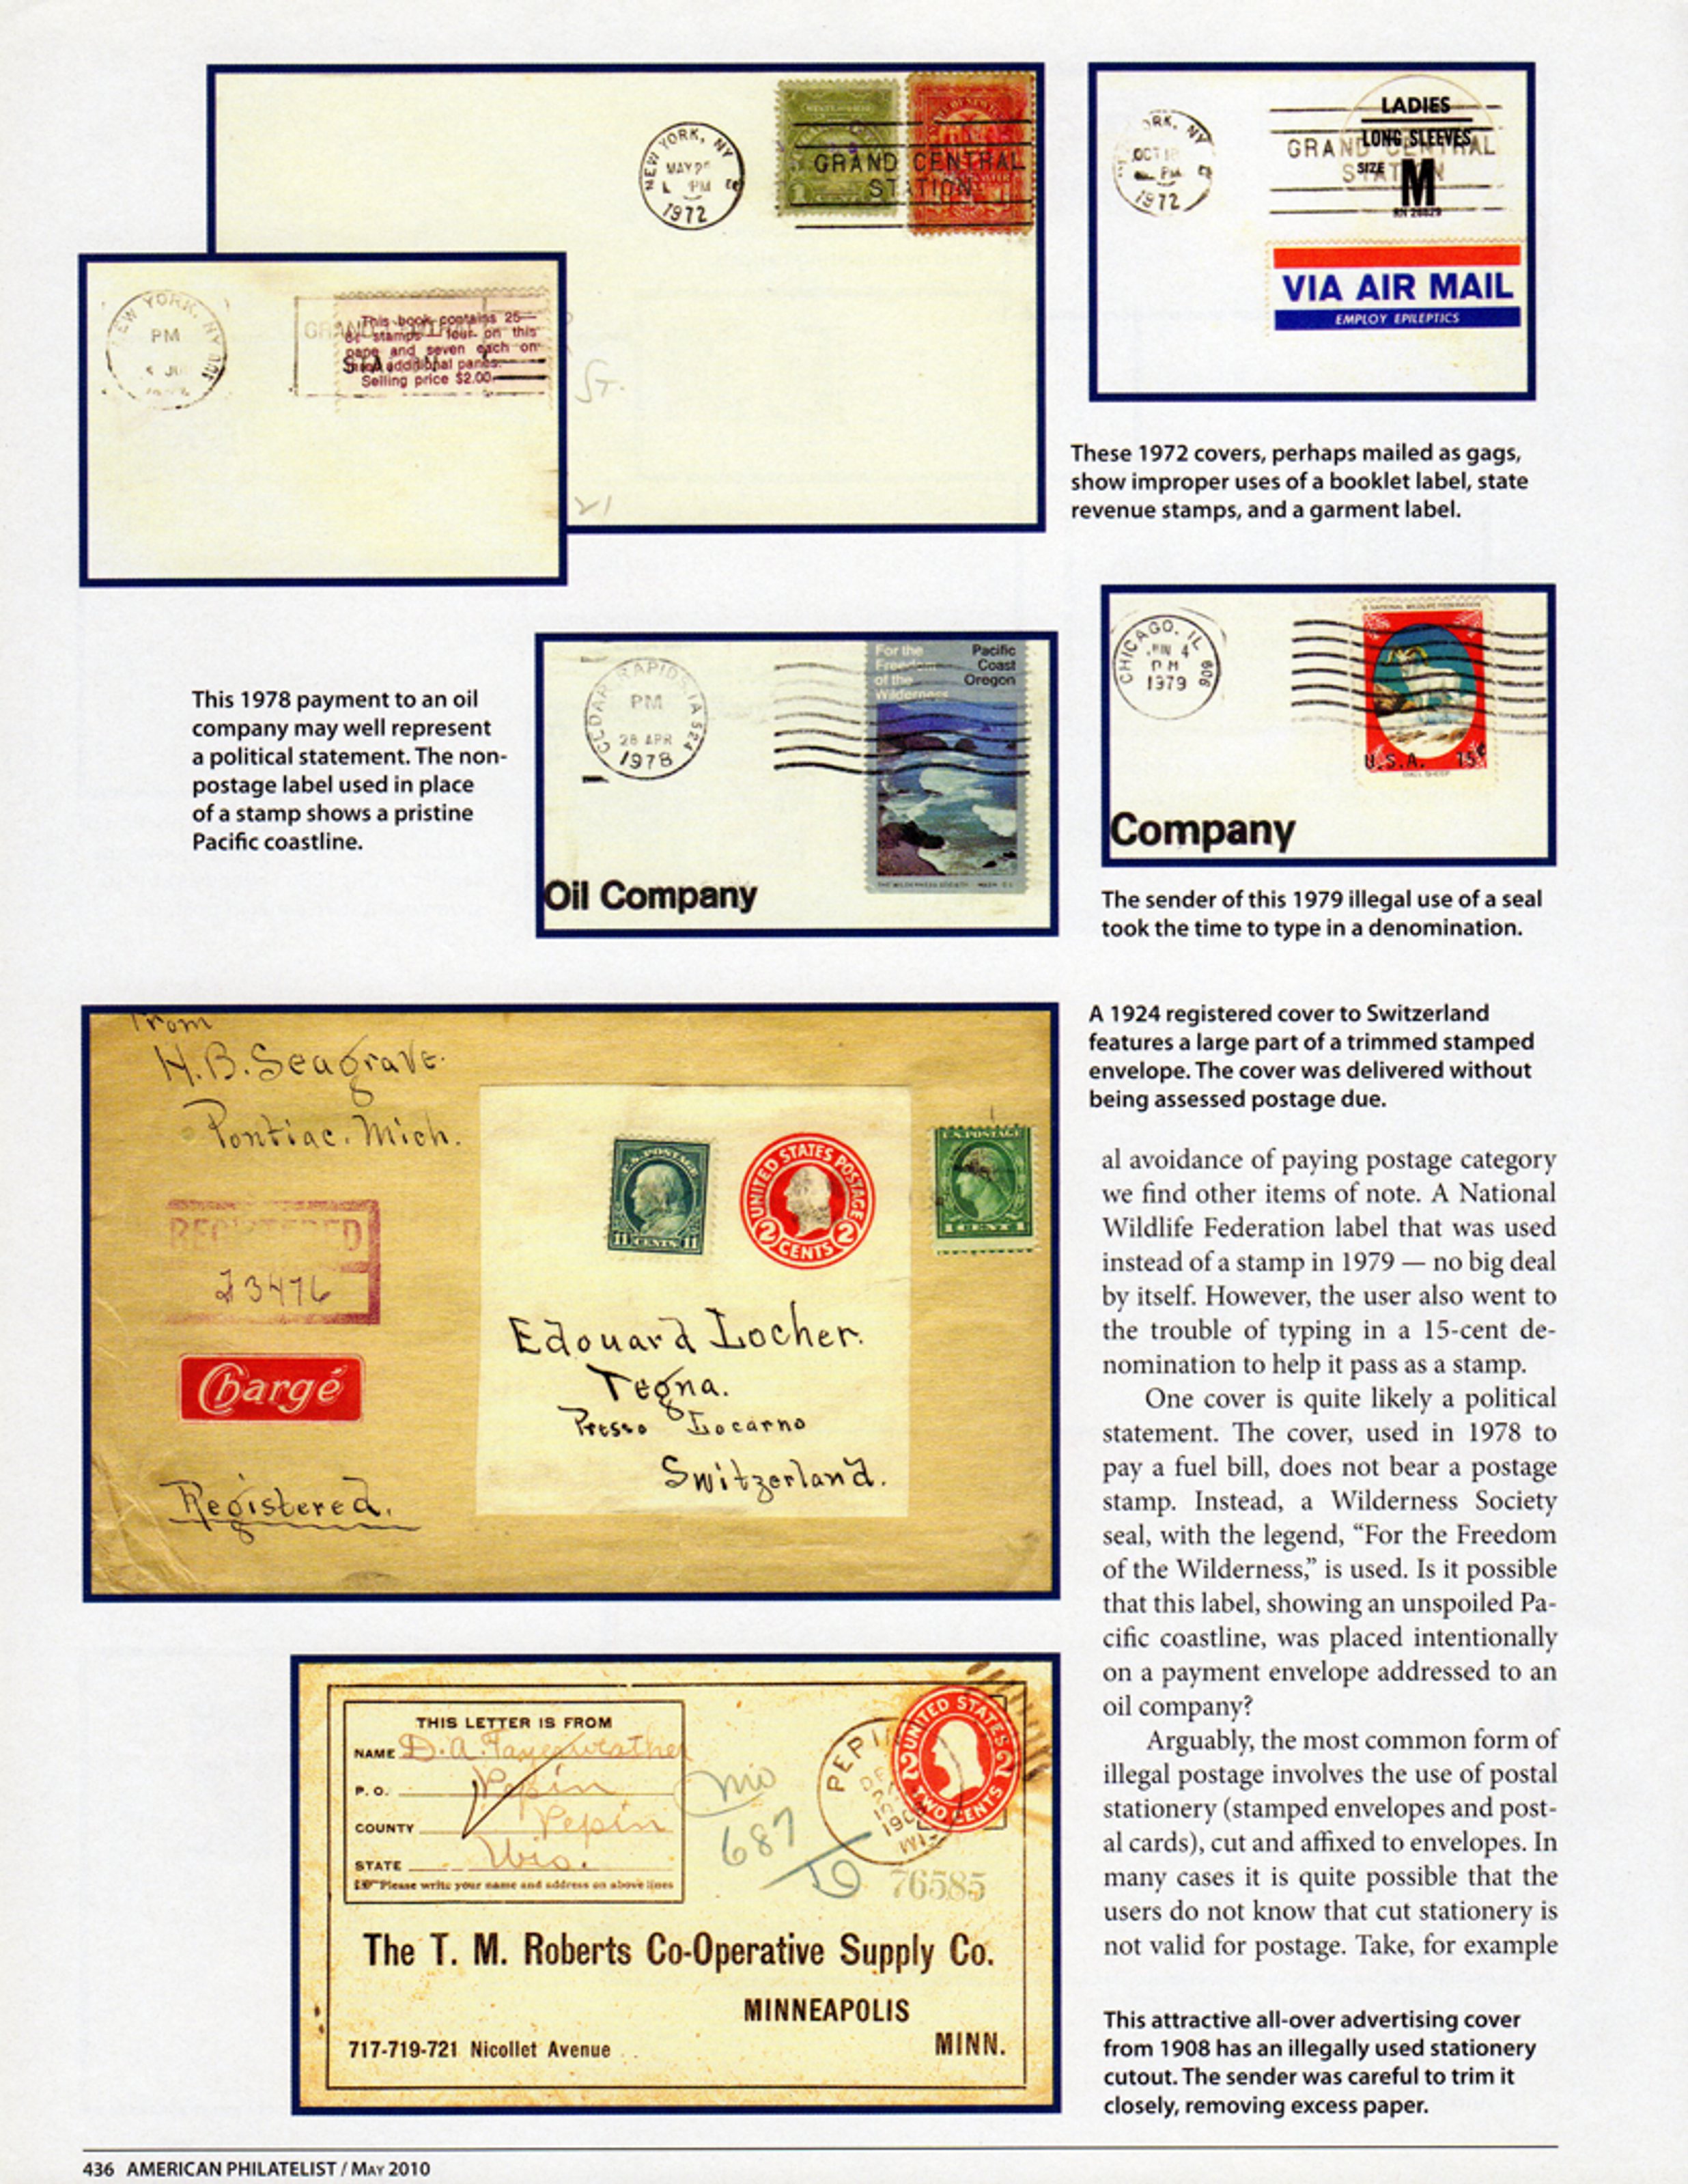 stamp errors, stamp errors, EFO, Youngblood, National WIldlife Federation label, Wilderness Society seal, postal stationery